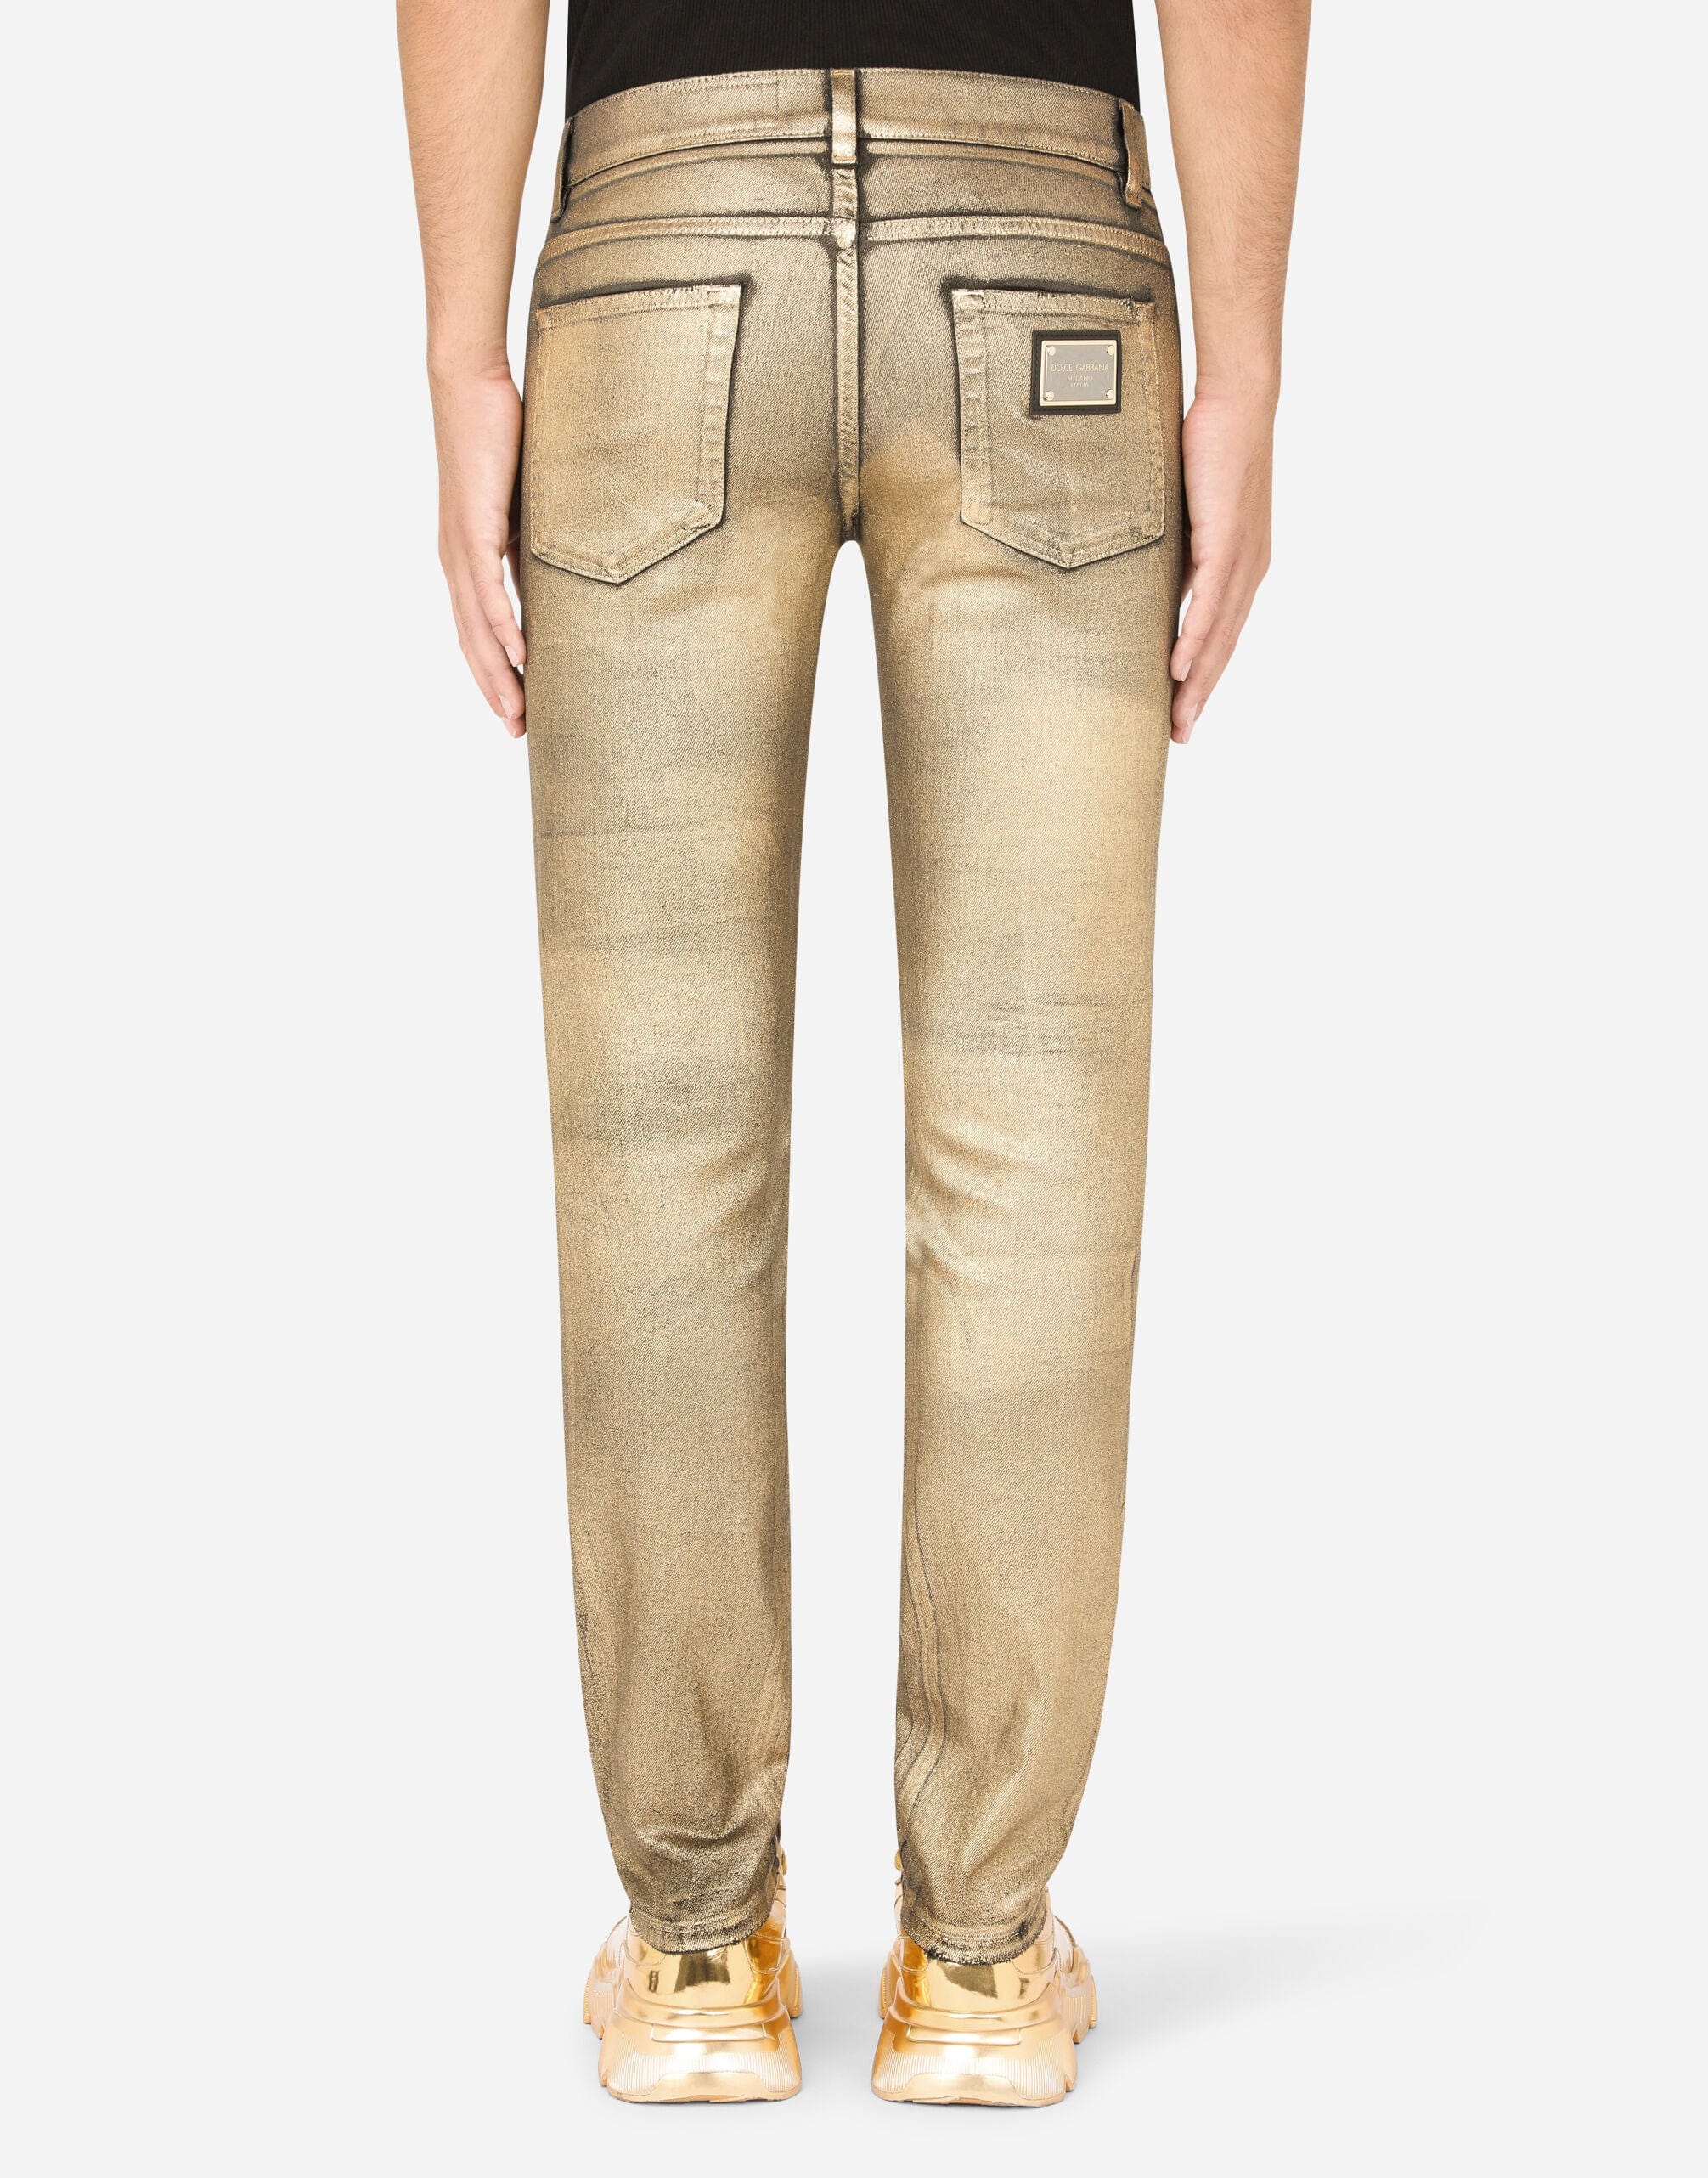 Dolce & Gabbana Skinny Jeans With Gold Coating